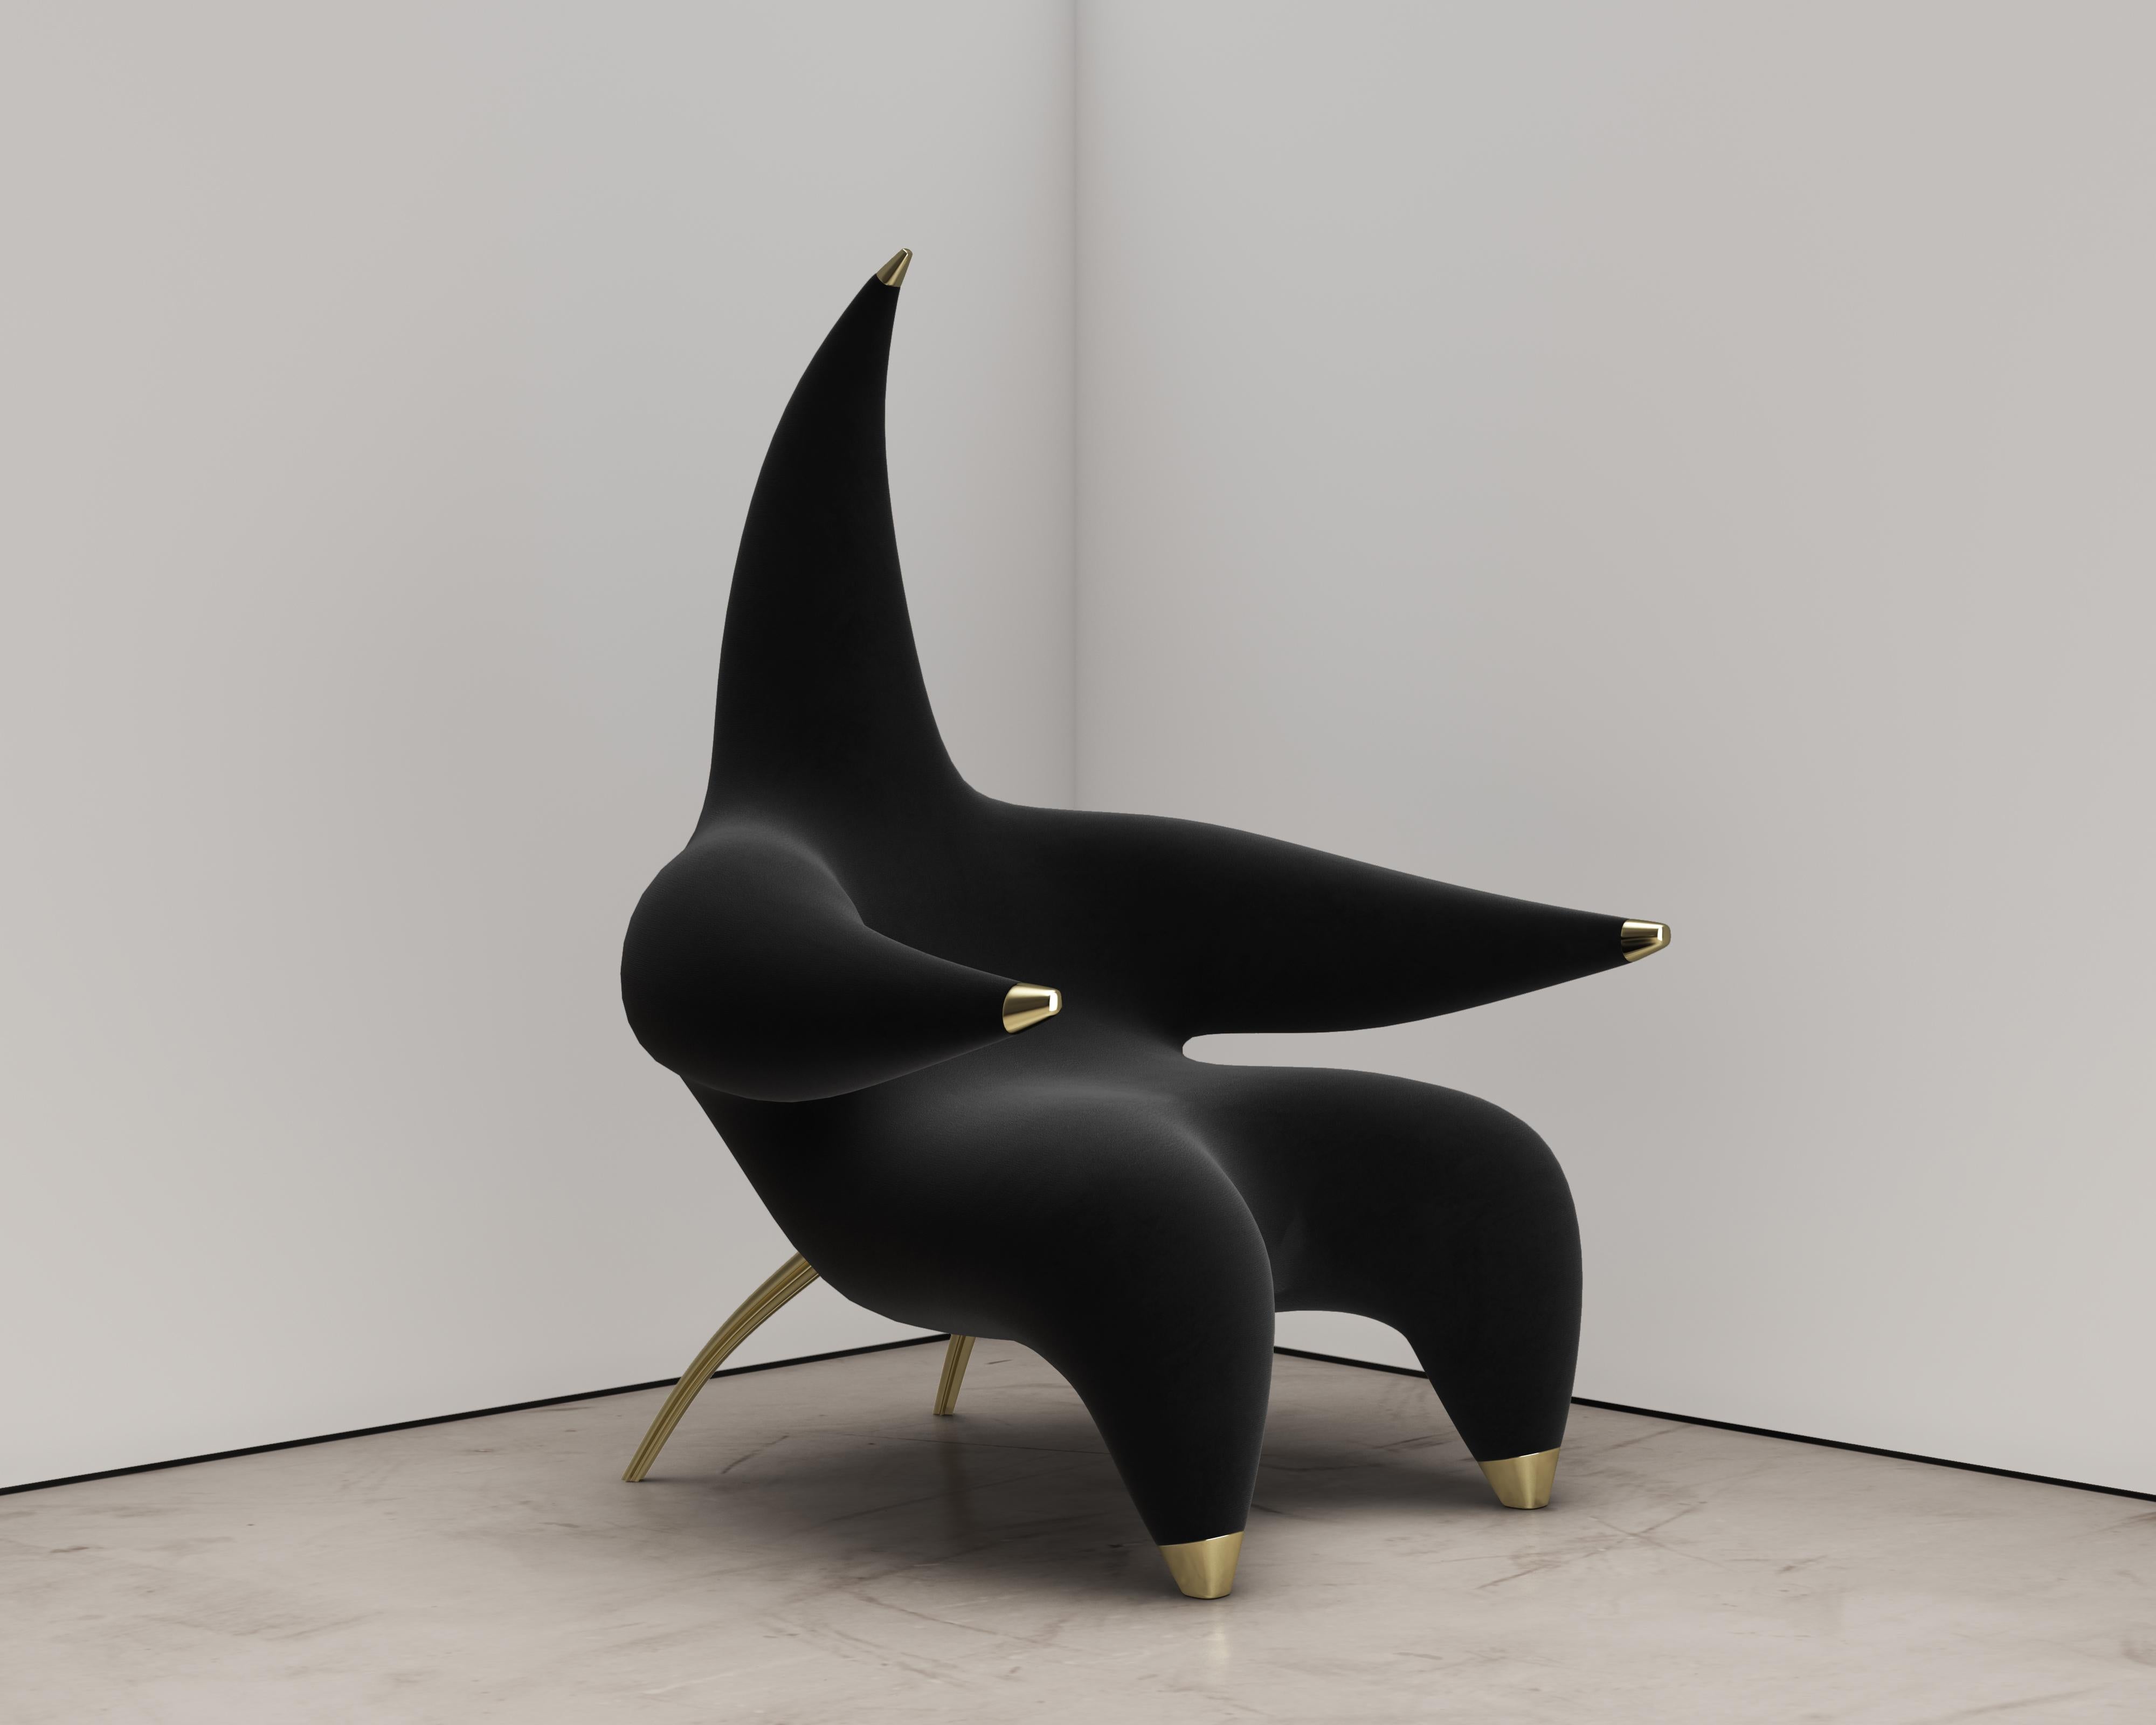 Part sculpture, part art, part design, part furniture.

The Star Lounger was named after the shape and appearance of a star. The Star Lounger is unmistakable in its originality, shape and form, and no other chair is like it. 

The Star lounger